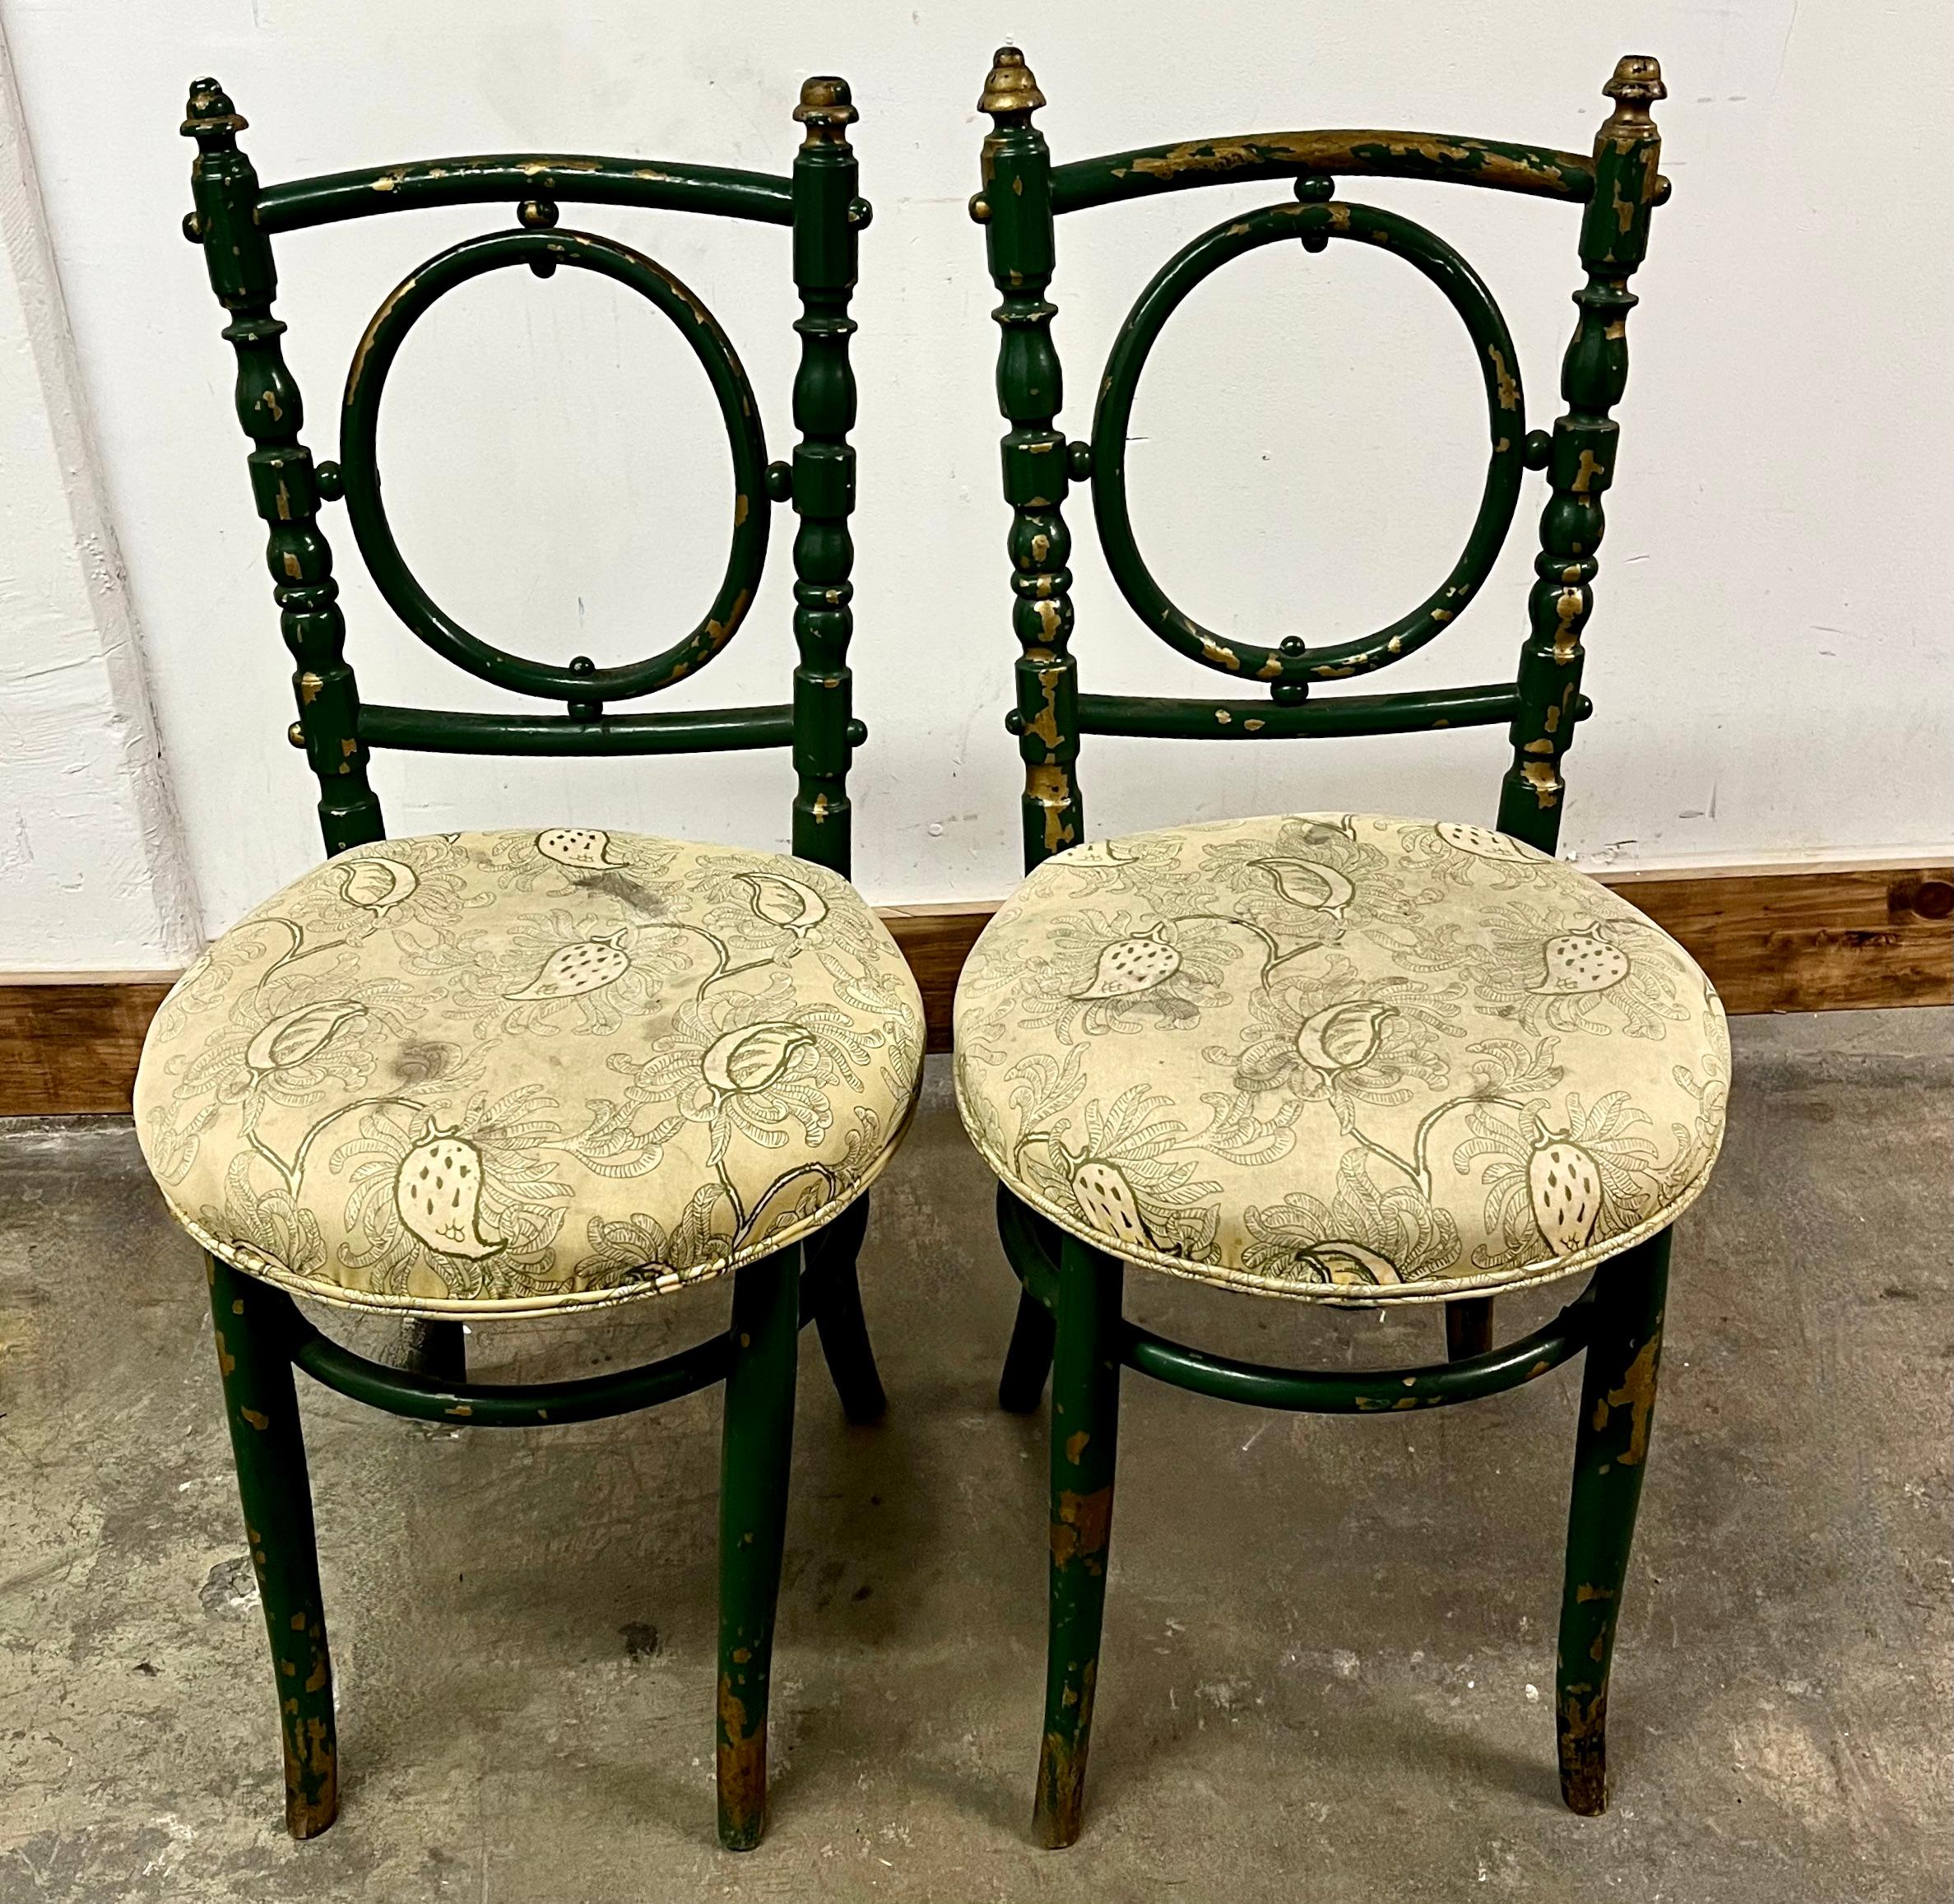 Pair of wonderfully designed wooden bentwood chairs with gilt details. The chairs are original. The design is unique and rare and would make a lovely decorative pair in many spaces. A compliment to any room.